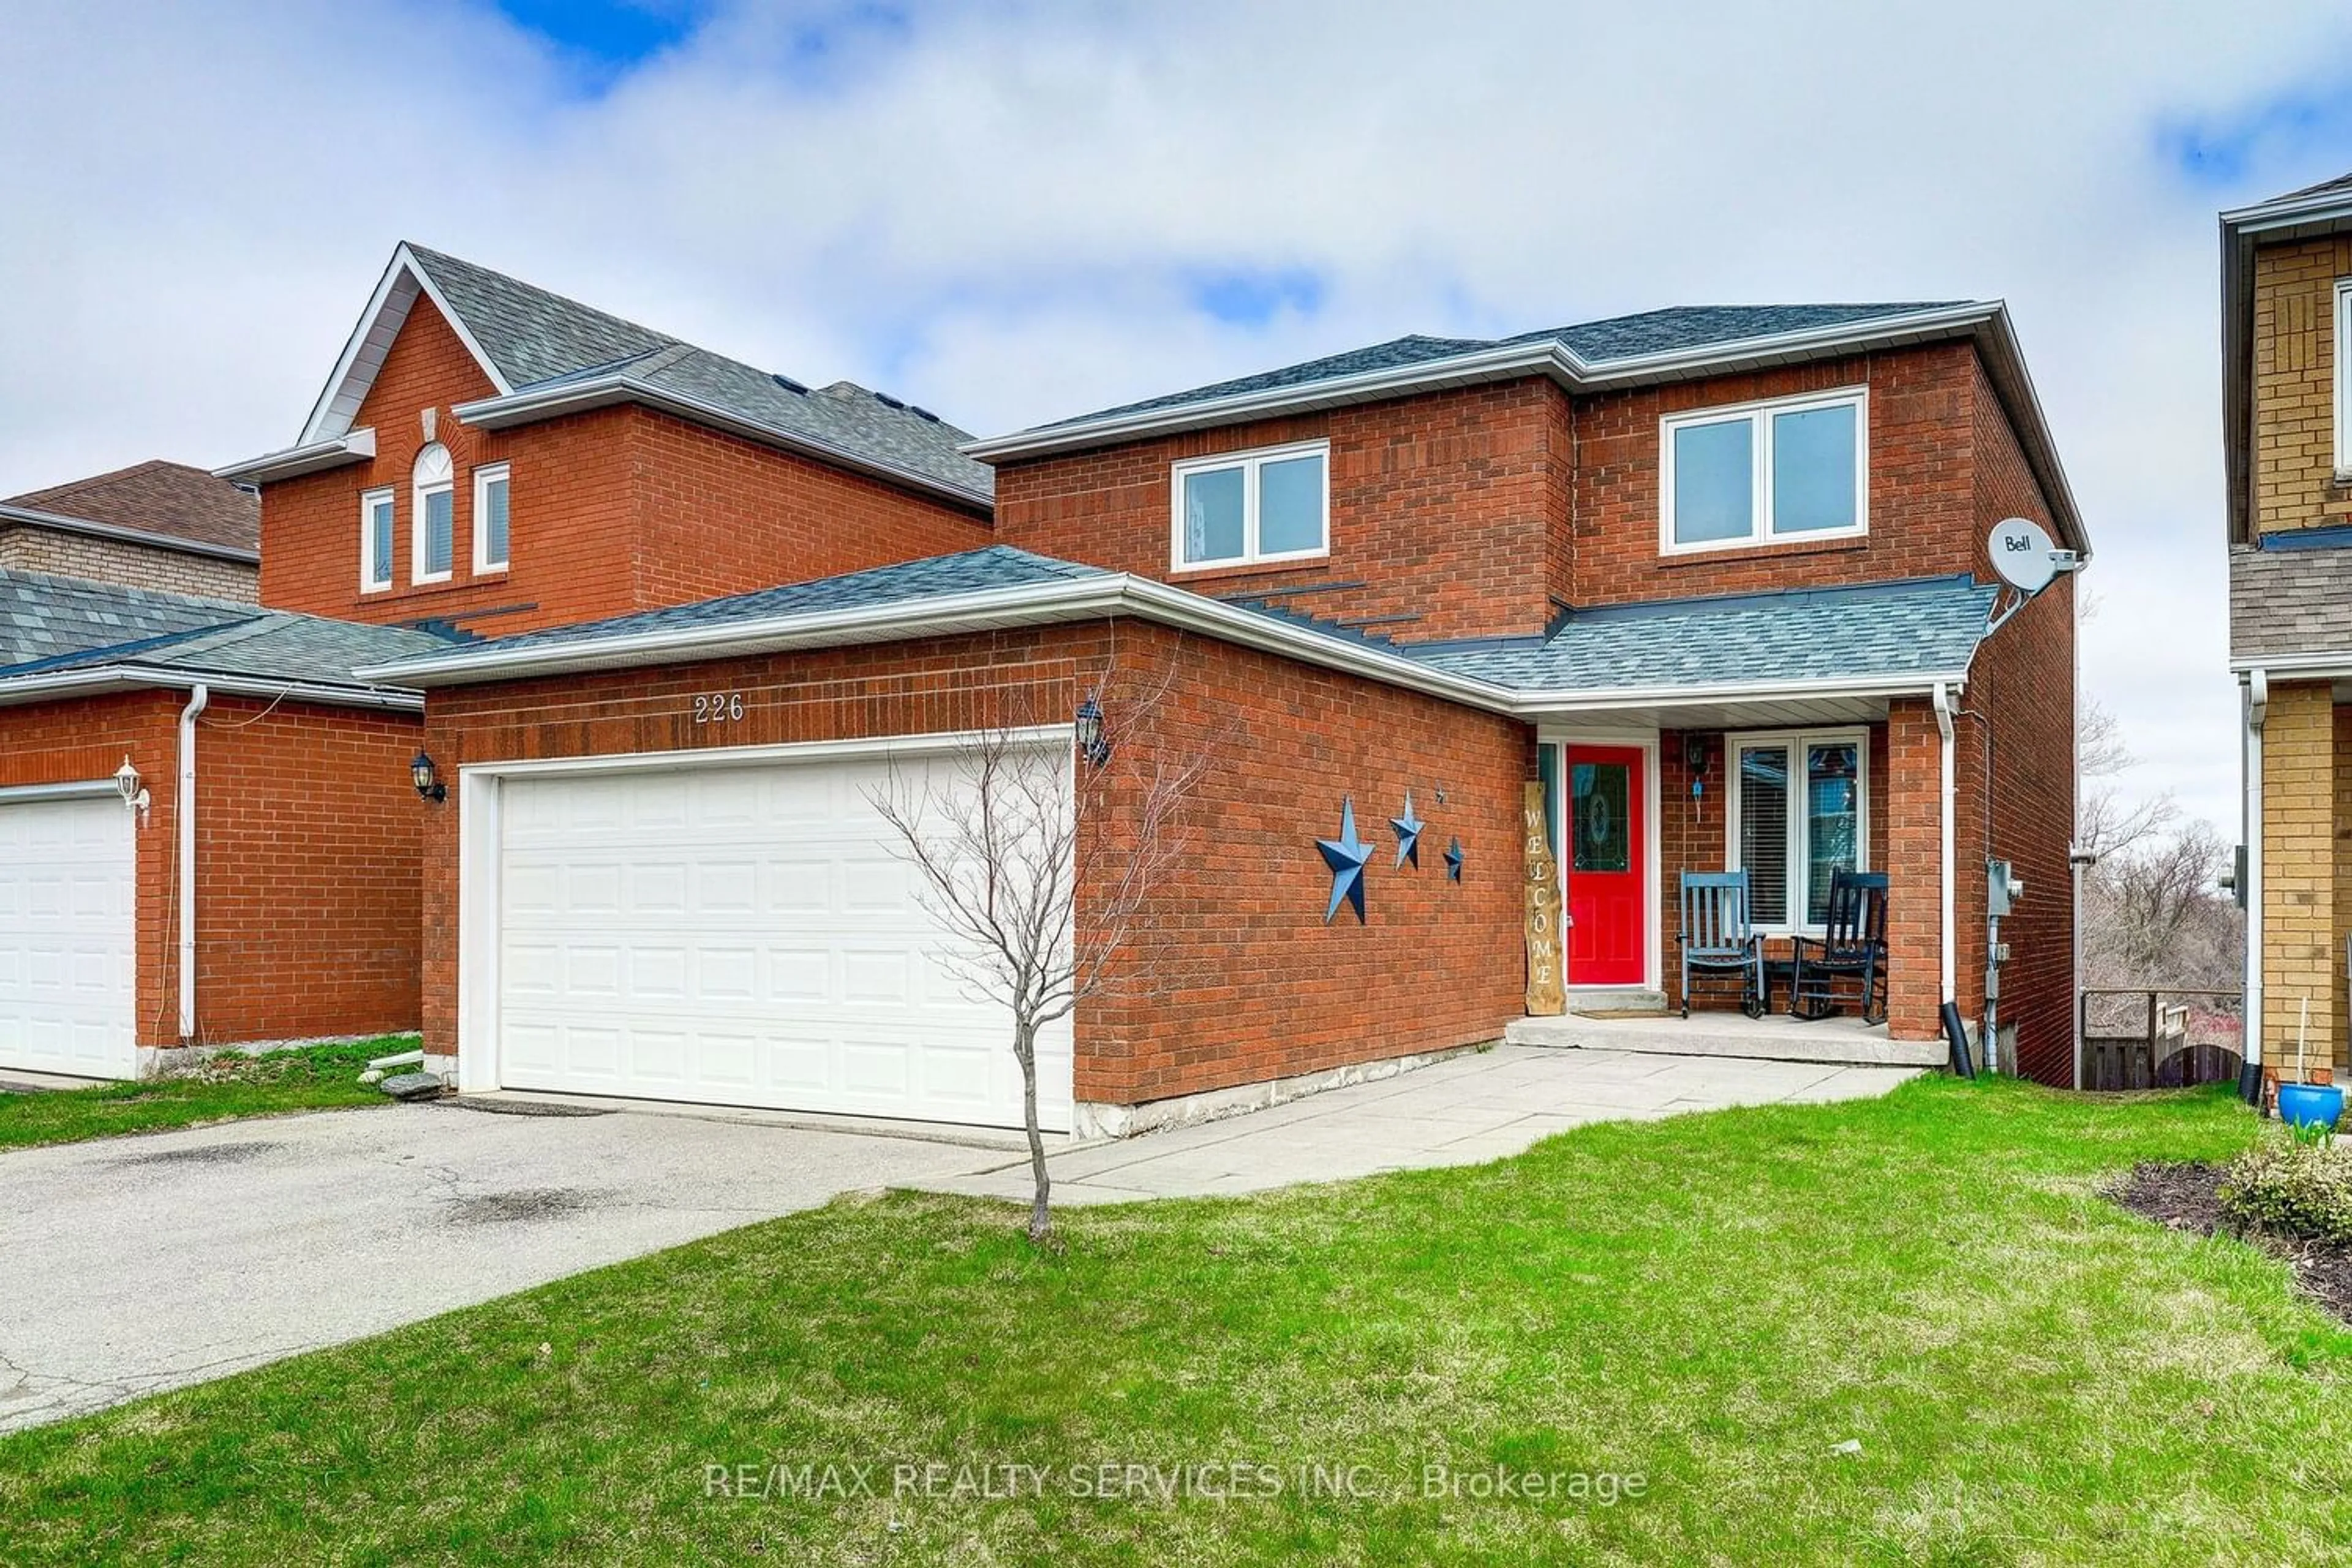 Home with brick exterior material for 226 Howard Cres, Orangeville Ontario L9W 4W6